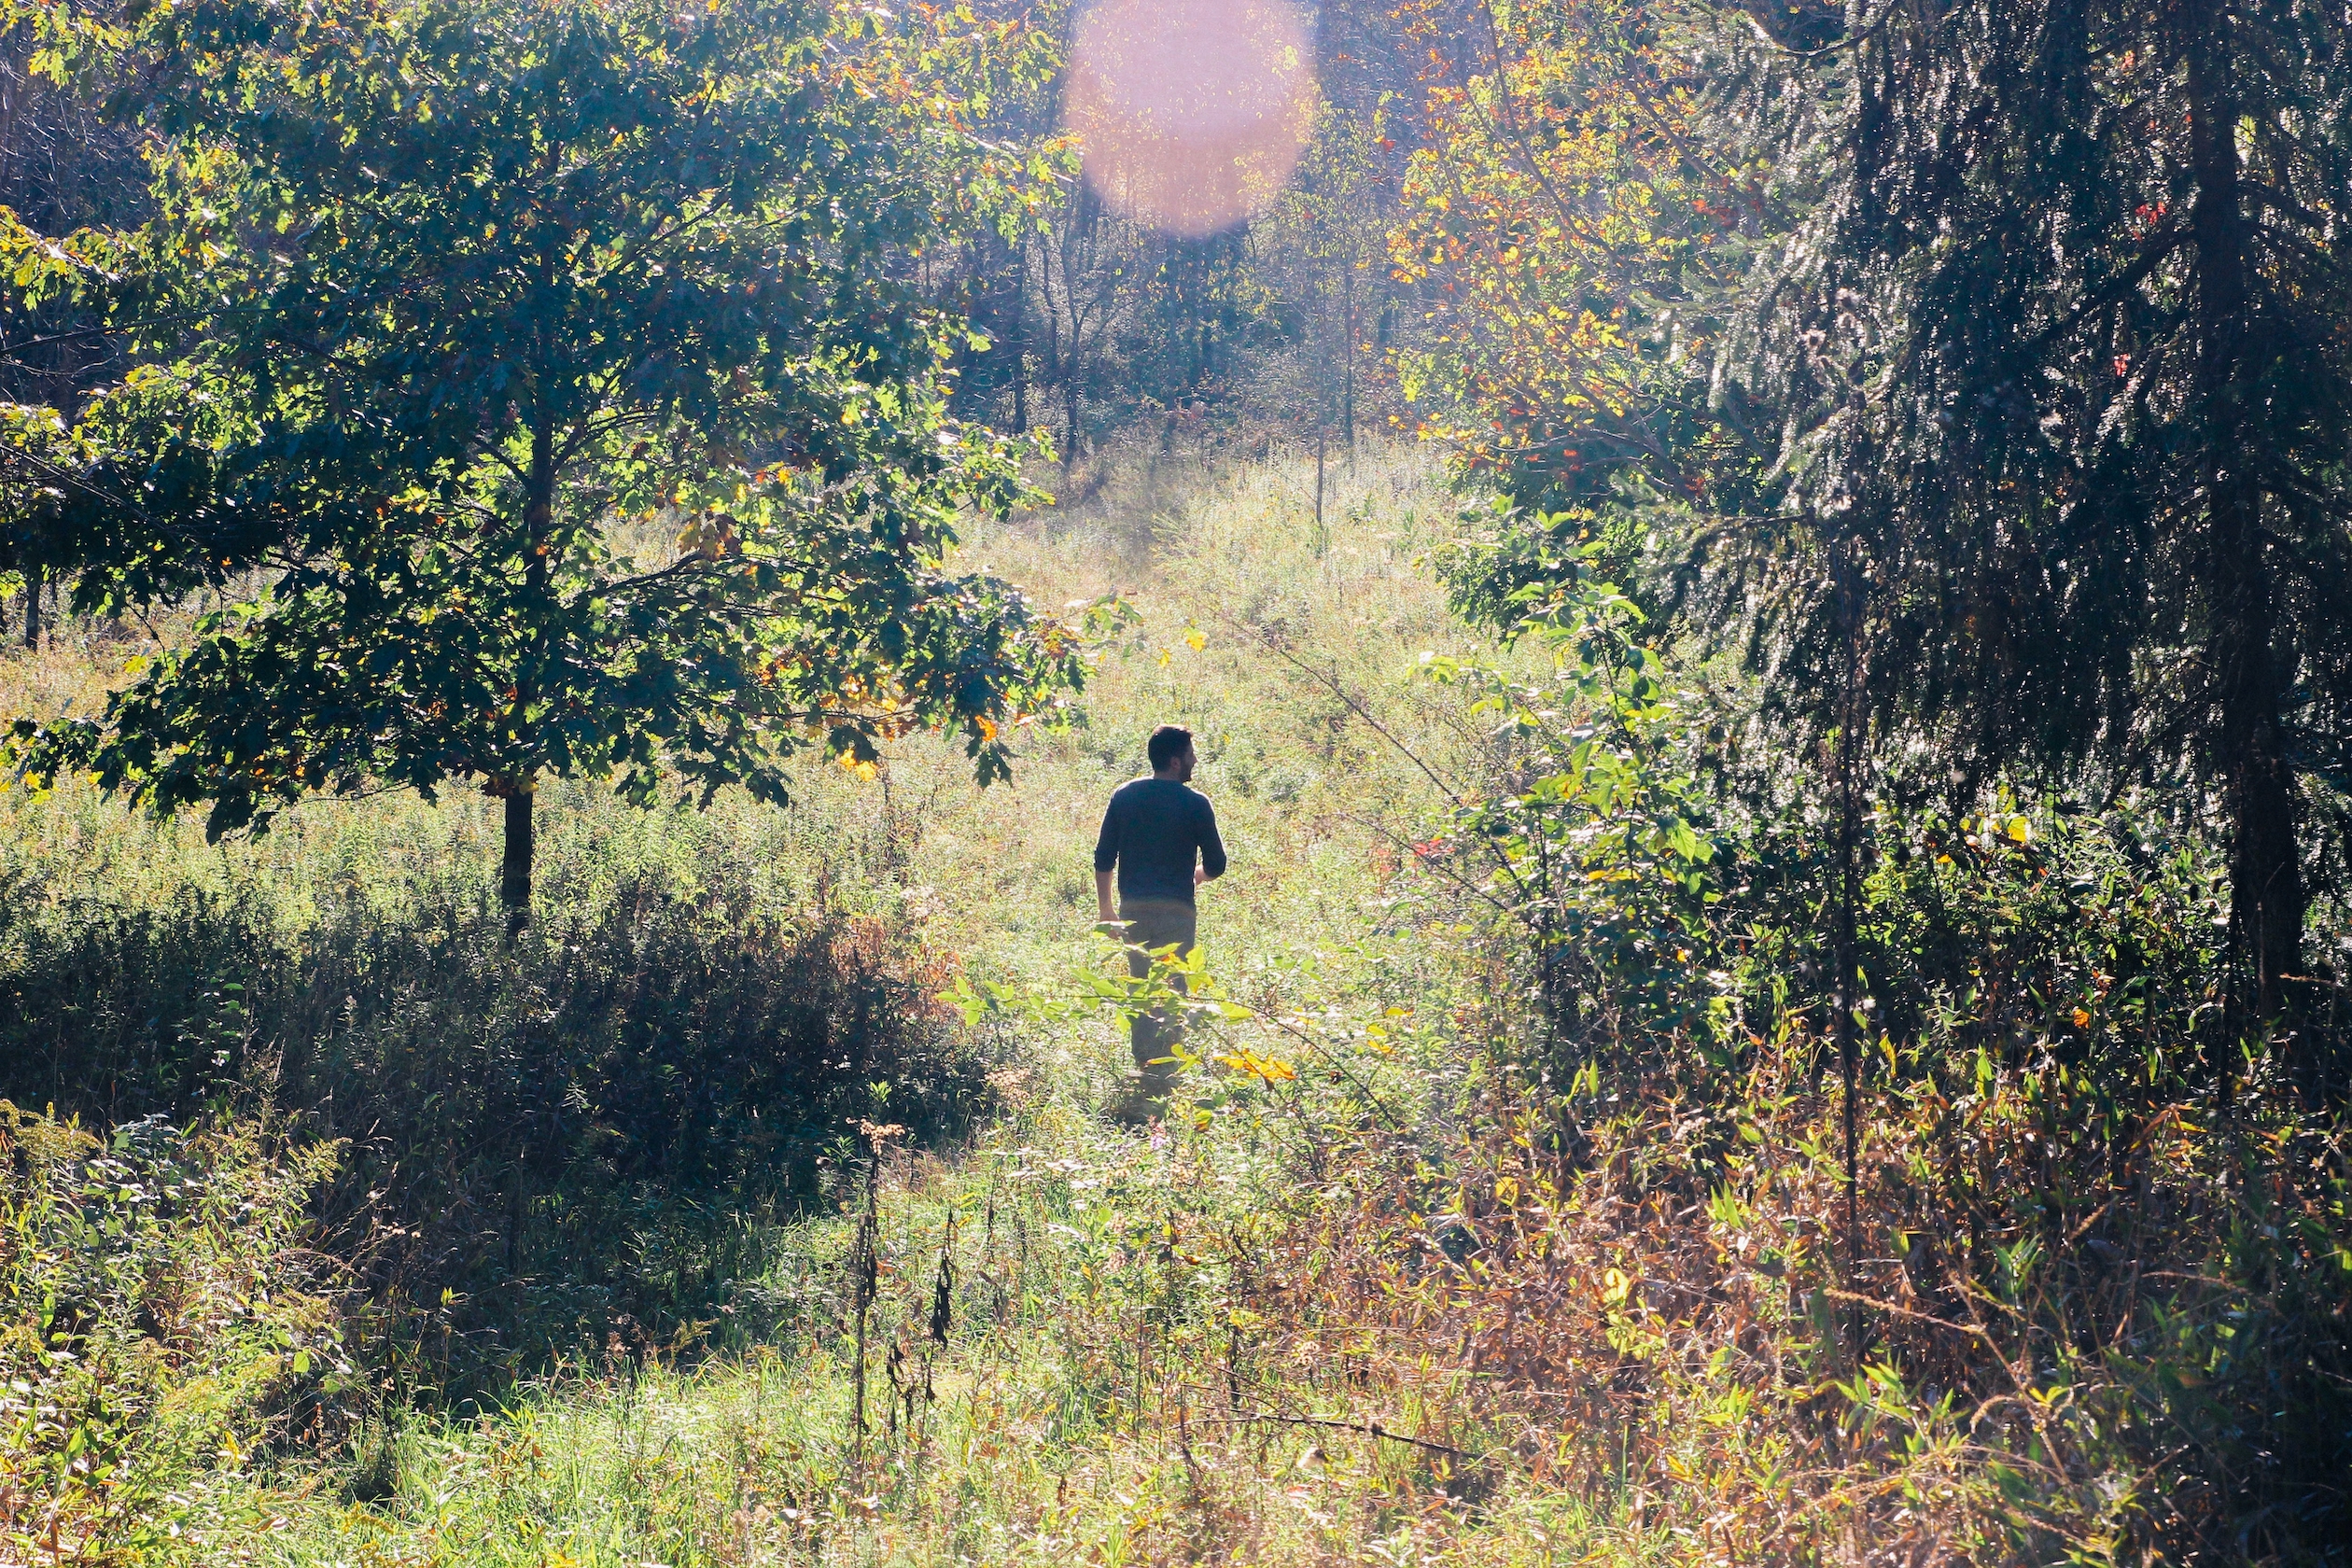 Photo of a person walking alone through a lush forest.